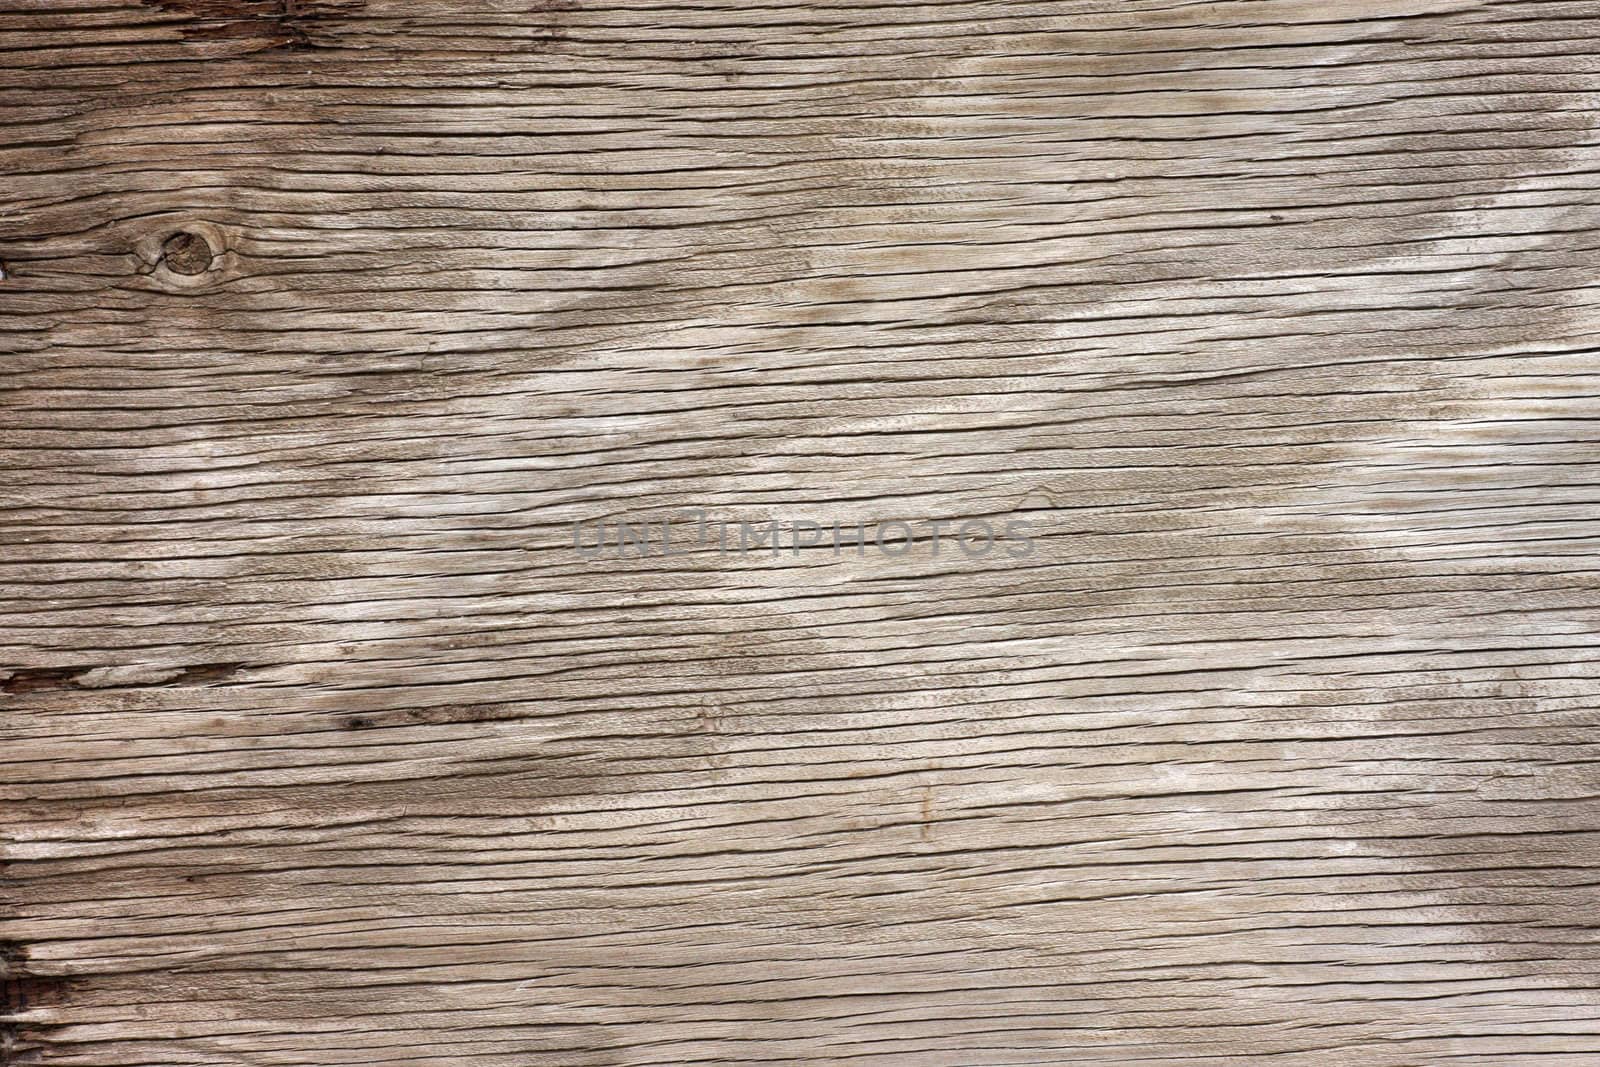 Grungy wood background